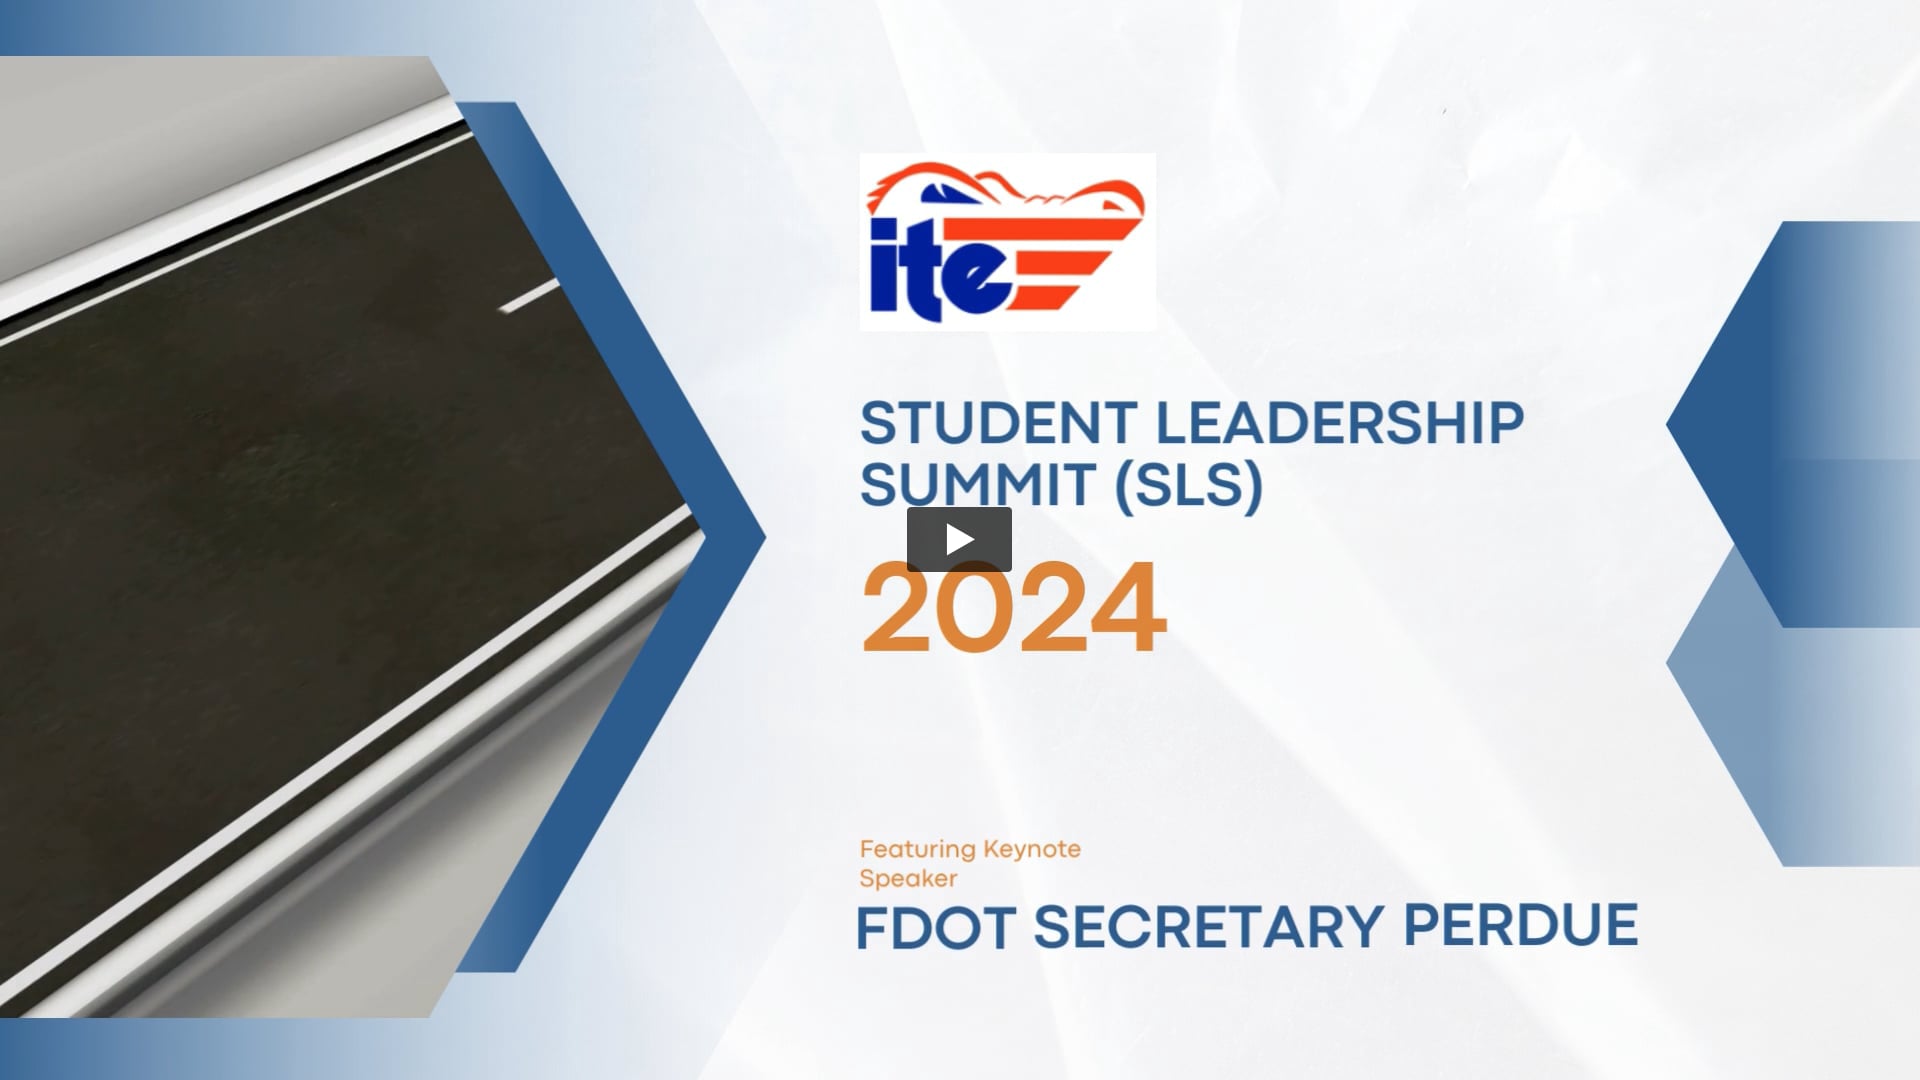 The UF Gator ITE student chapter is hosting the 2024 Student Leadership Conference